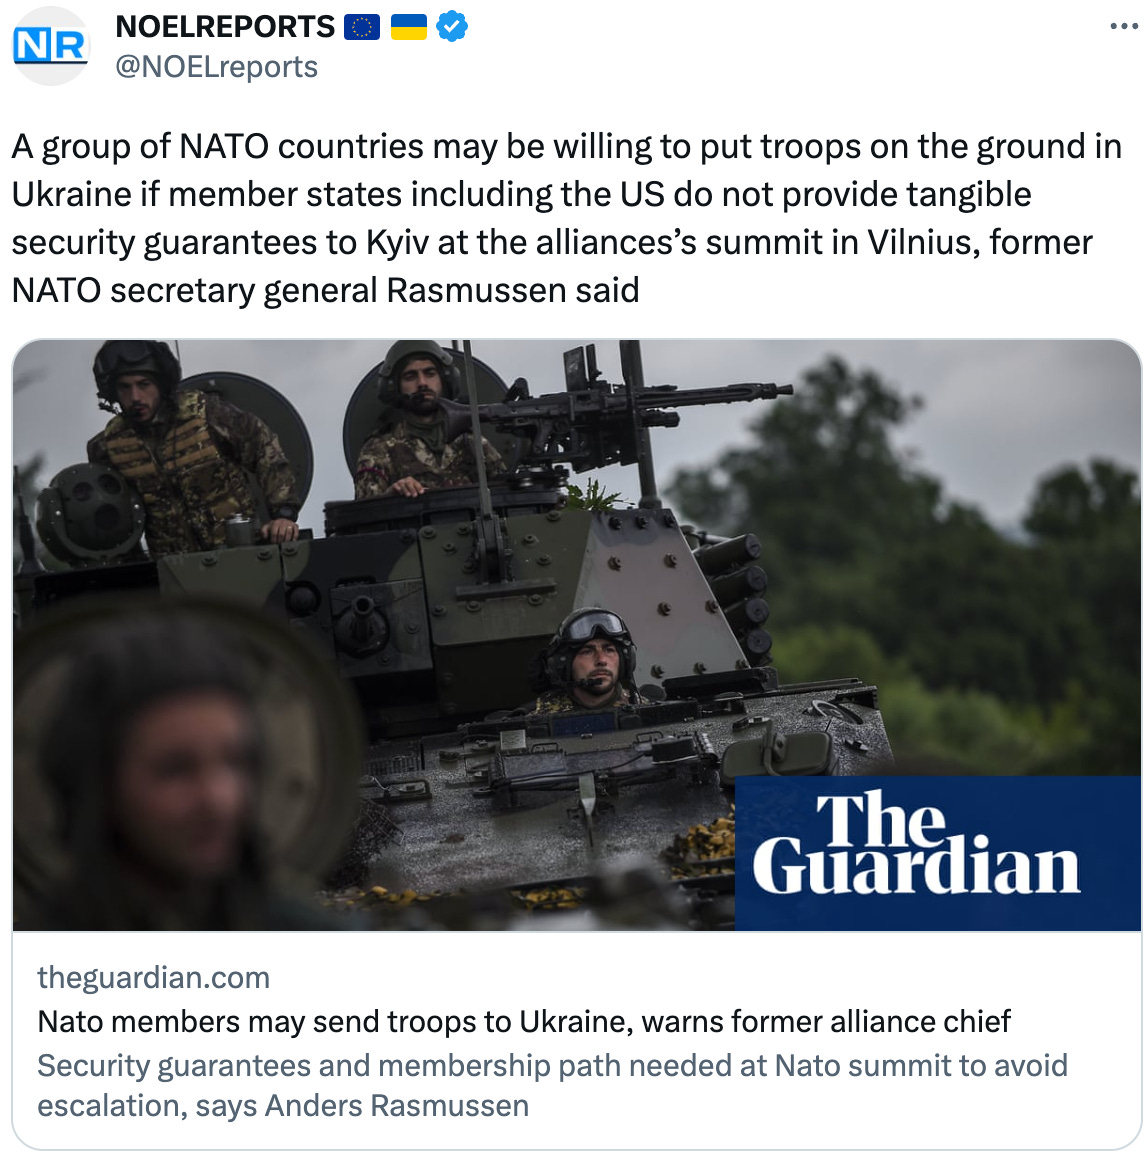  NOELREPORTS 🇪🇺 🇺🇦 @NOELreports A group of NATO countries may be willing to put troops on the ground in Ukraine if member states including the US do not provide tangible security guarantees to Kyiv at the alliances’s summit in Vilnius, former NATO secretary general Rasmussen said theguardian.com Nato members may send troops to Ukraine, warns former alliance chief Security guarantees and membership path needed at Nato summit to avoid escalation, says Anders Rasmussen